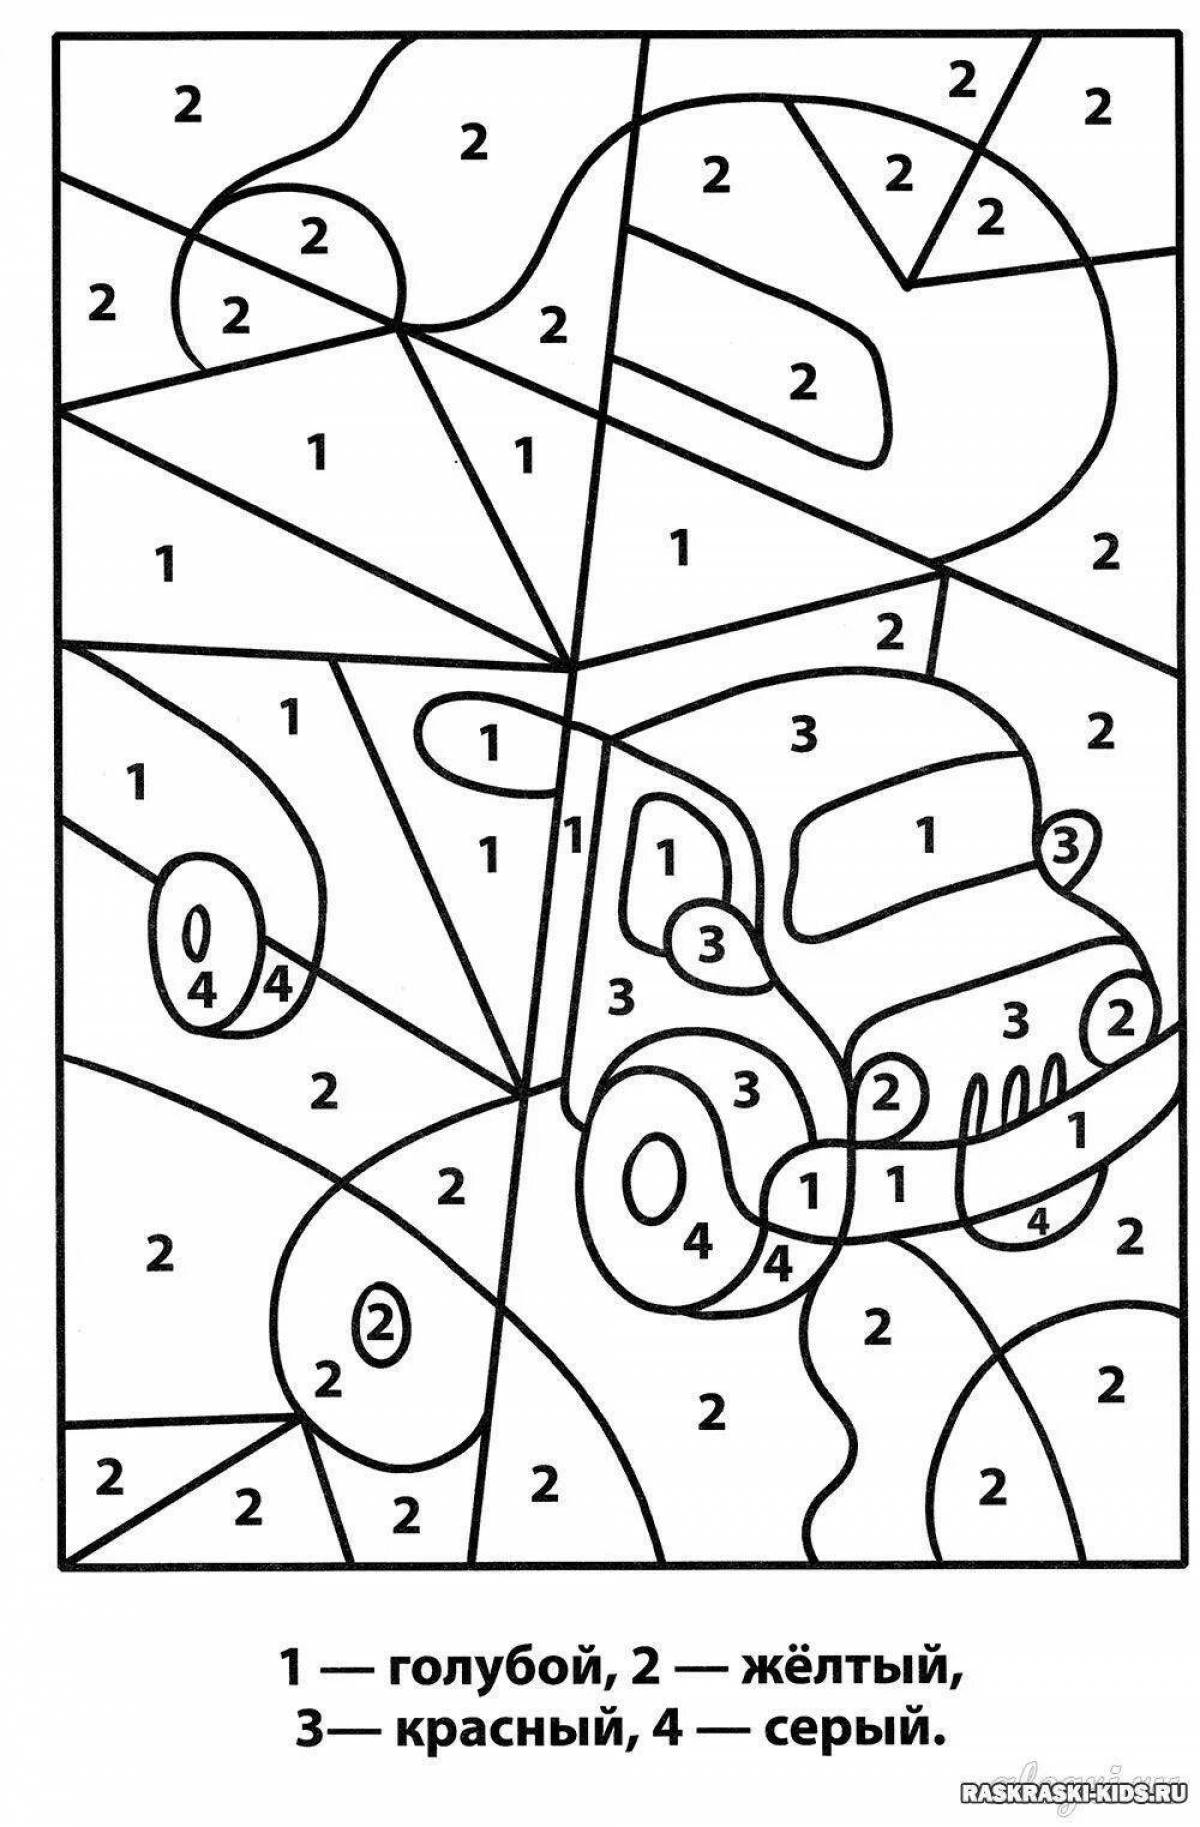 Creative number coloring game